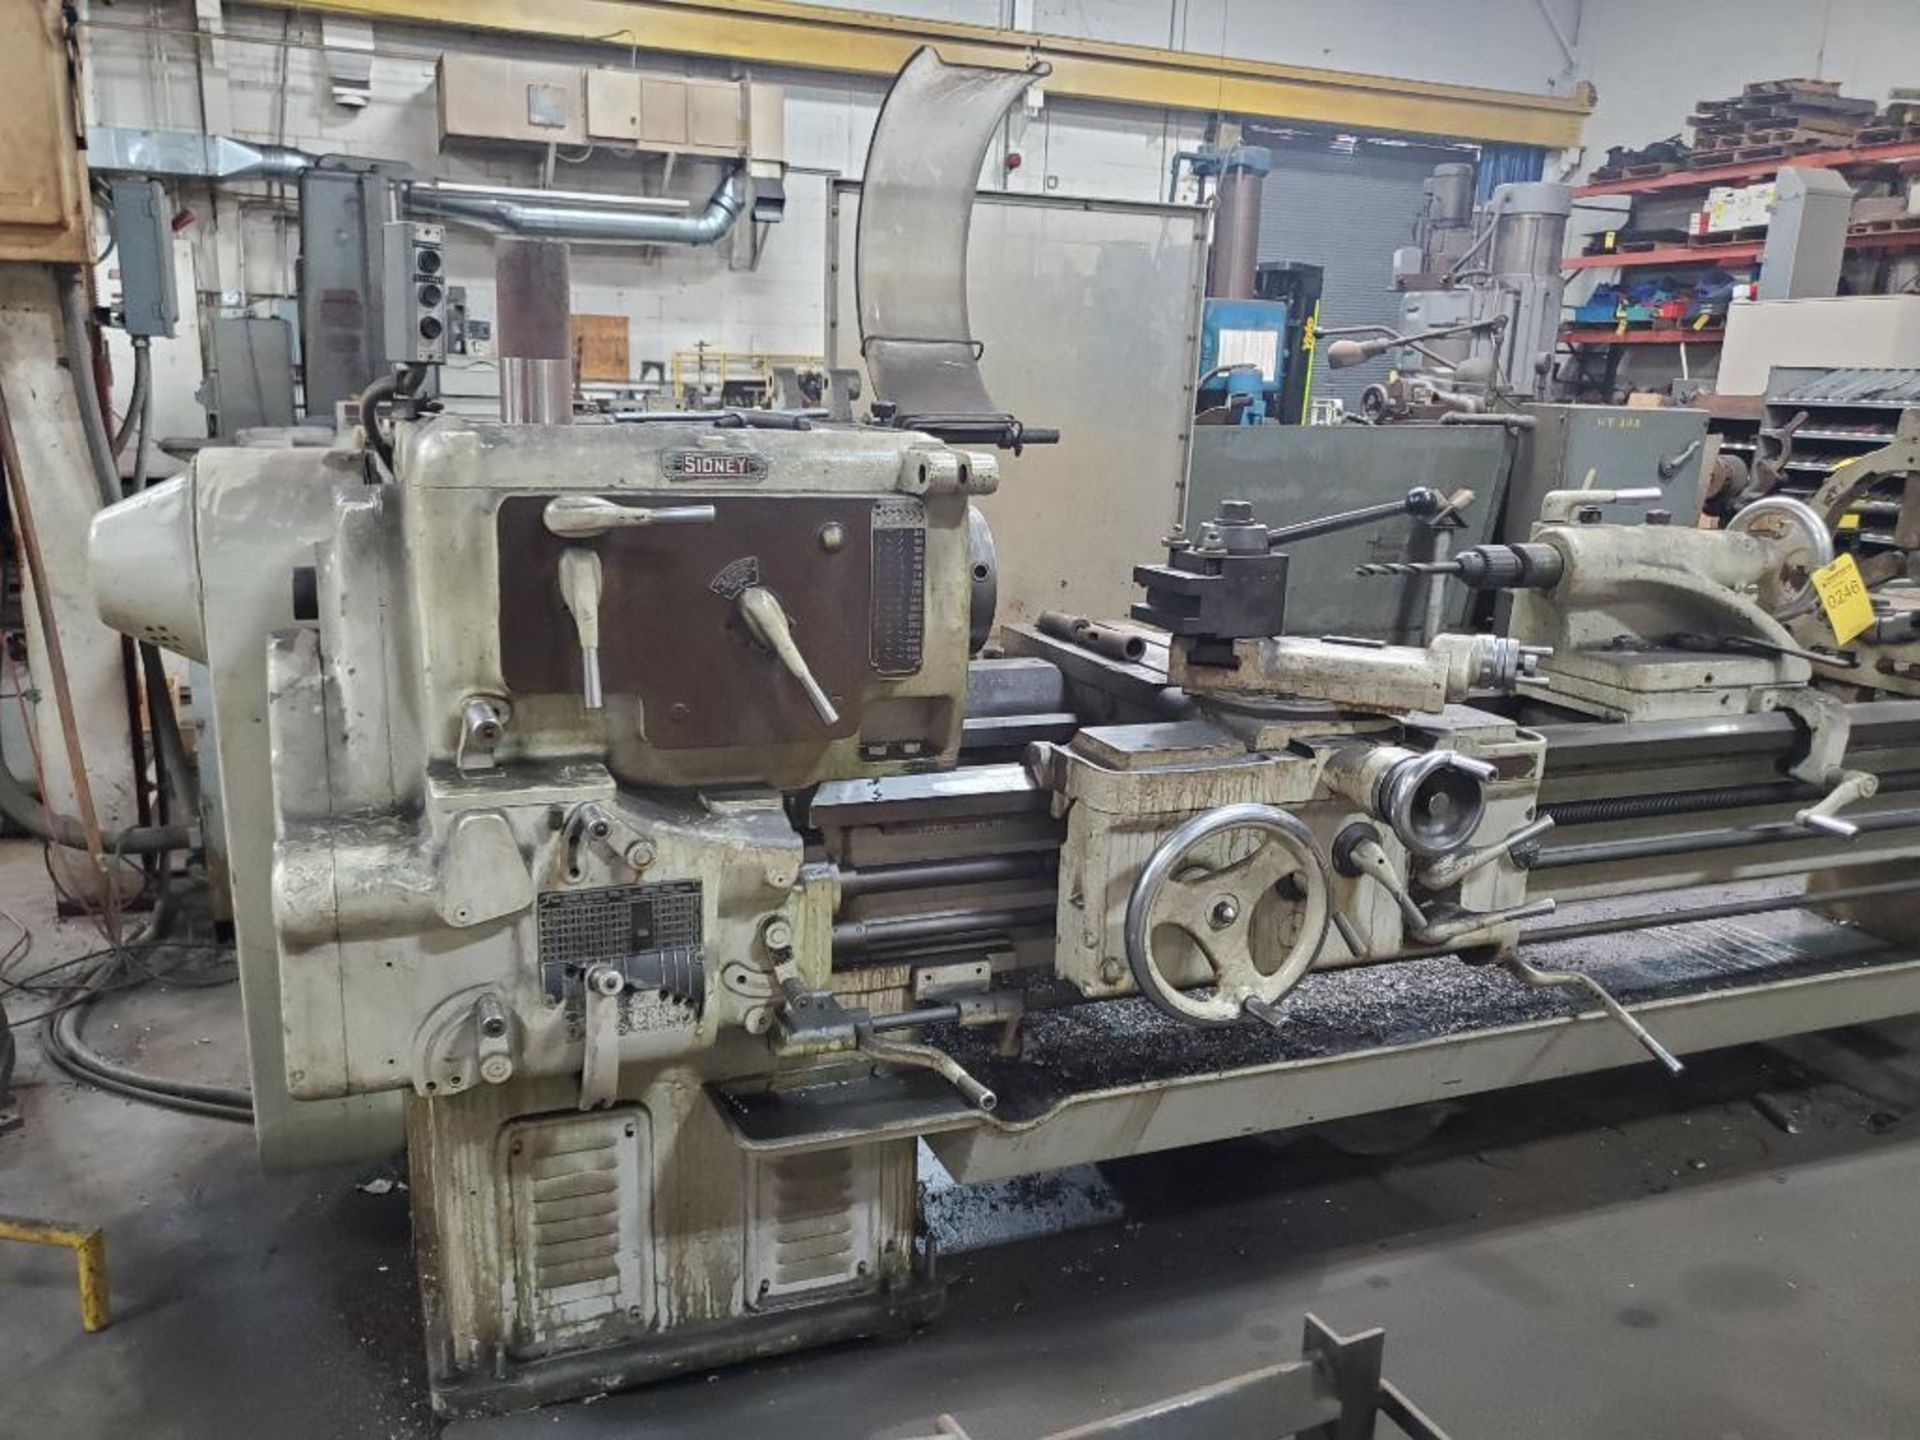 SYDNEY ENGINE LATHE, 16' BED, 2'' BAR THROUGH SPINDLE, 24-720 SPINDLE SPEEDS, TAILSTOCK, CROSS - Image 8 of 18